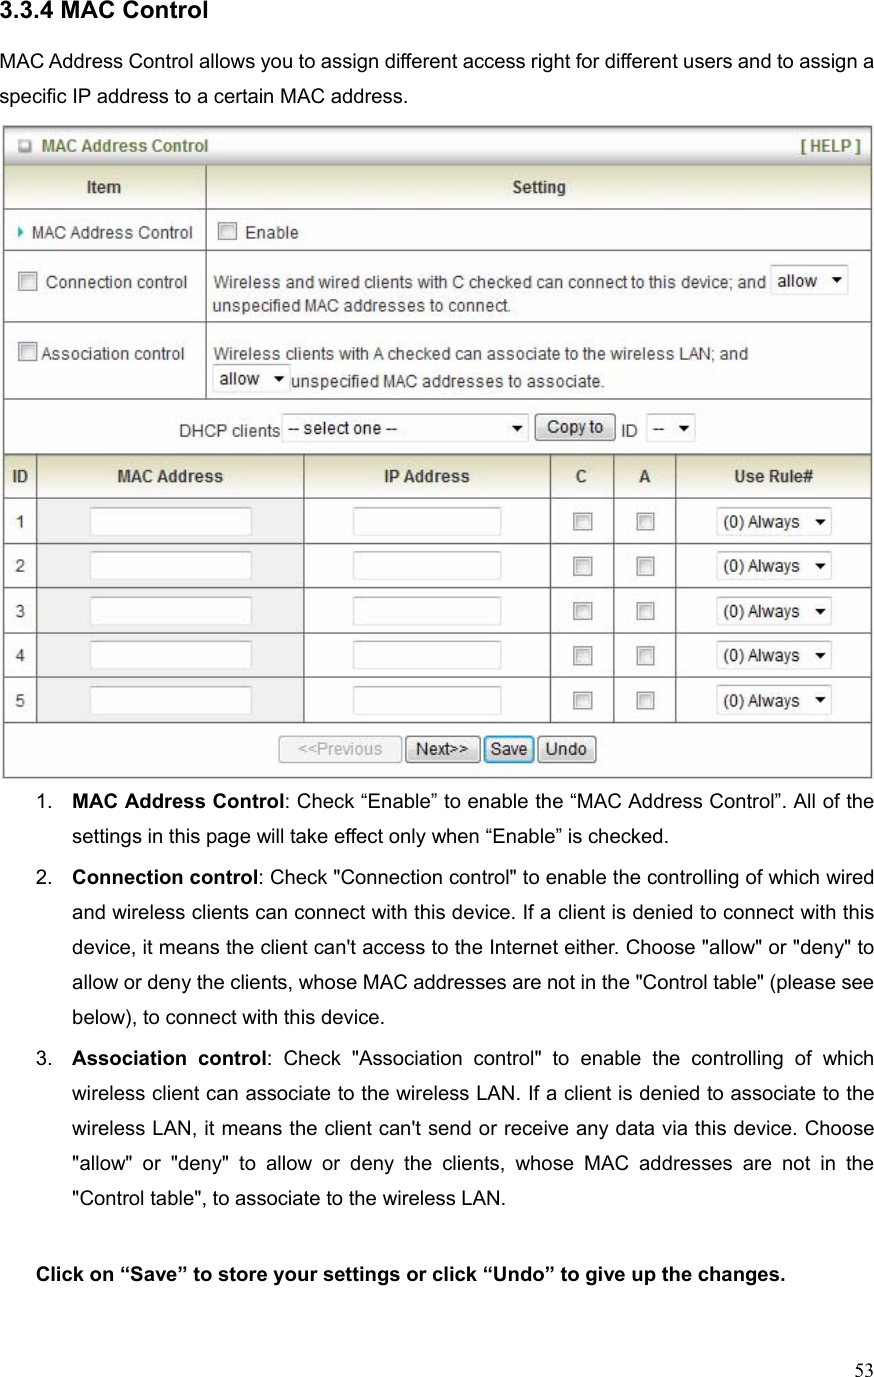  533.3.4 MAC Control  MAC Address Control allows you to assign different access right for different users and to assign a specific IP address to a certain MAC address.  1.  MAC Address Control: Check “Enable” to enable the “MAC Address Control”. All of the settings in this page will take effect only when “Enable” is checked. 2.  Connection control: Check &quot;Connection control&quot; to enable the controlling of which wired and wireless clients can connect with this device. If a client is denied to connect with this device, it means the client can&apos;t access to the Internet either. Choose &quot;allow&quot; or &quot;deny&quot; to allow or deny the clients, whose MAC addresses are not in the &quot;Control table&quot; (please see below), to connect with this device. 3.  Association control: Check &quot;Association control&quot; to enable the controlling of which wireless client can associate to the wireless LAN. If a client is denied to associate to the wireless LAN, it means the client can&apos;t send or receive any data via this device. Choose &quot;allow&quot; or &quot;deny&quot; to allow or deny the clients, whose MAC addresses are not in the &quot;Control table&quot;, to associate to the wireless LAN.  Click on “Save” to store your settings or click “Undo” to give up the changes.  